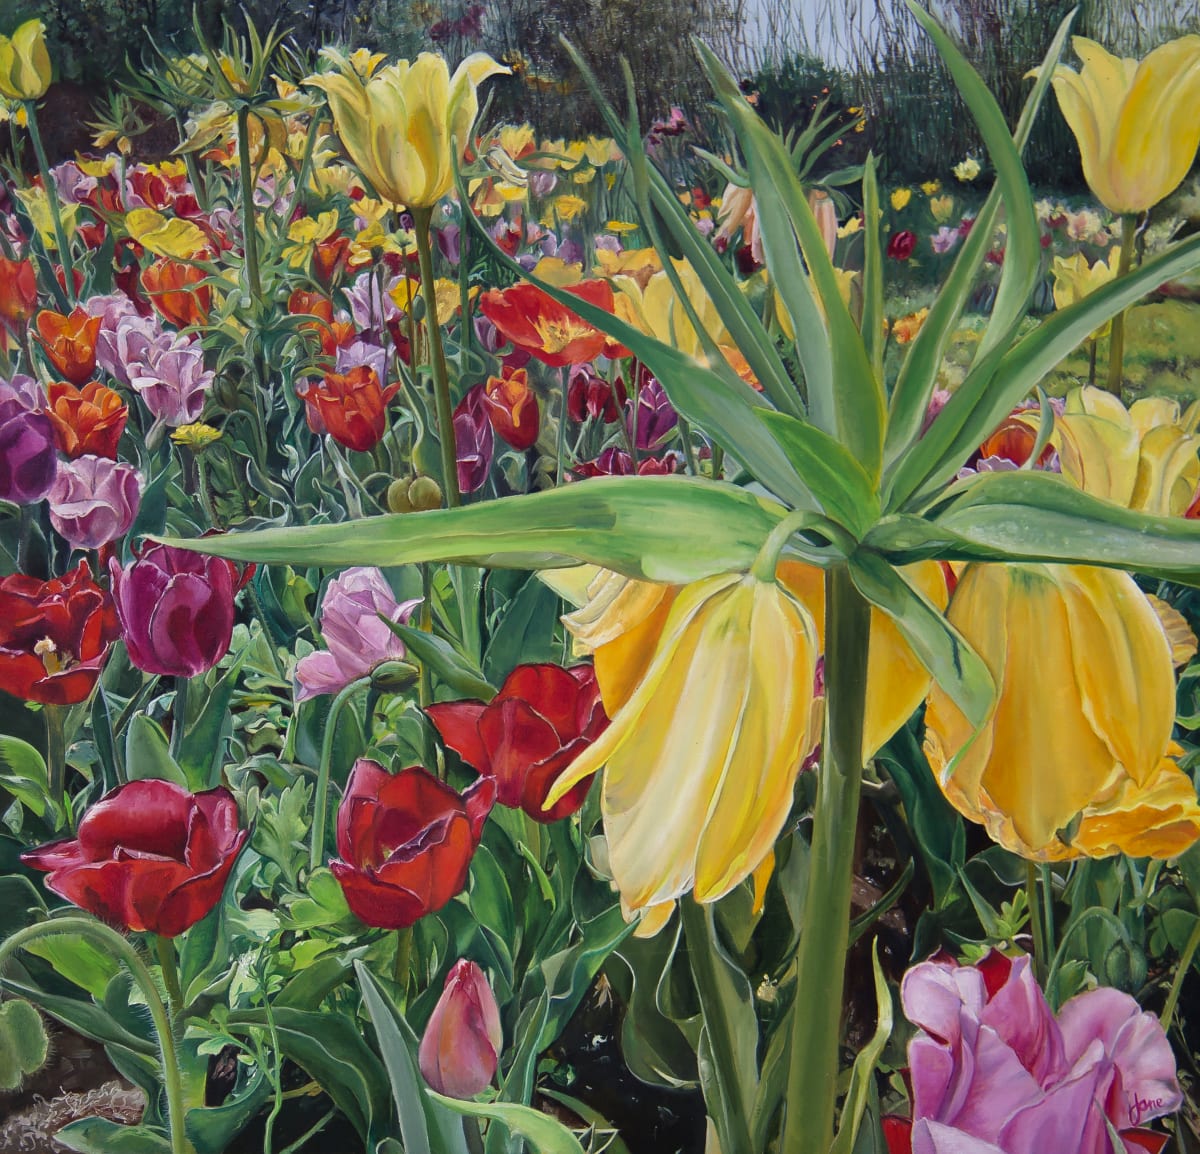 Carousel Tulips by Nila Jane Autry  Image: High resolution for printing